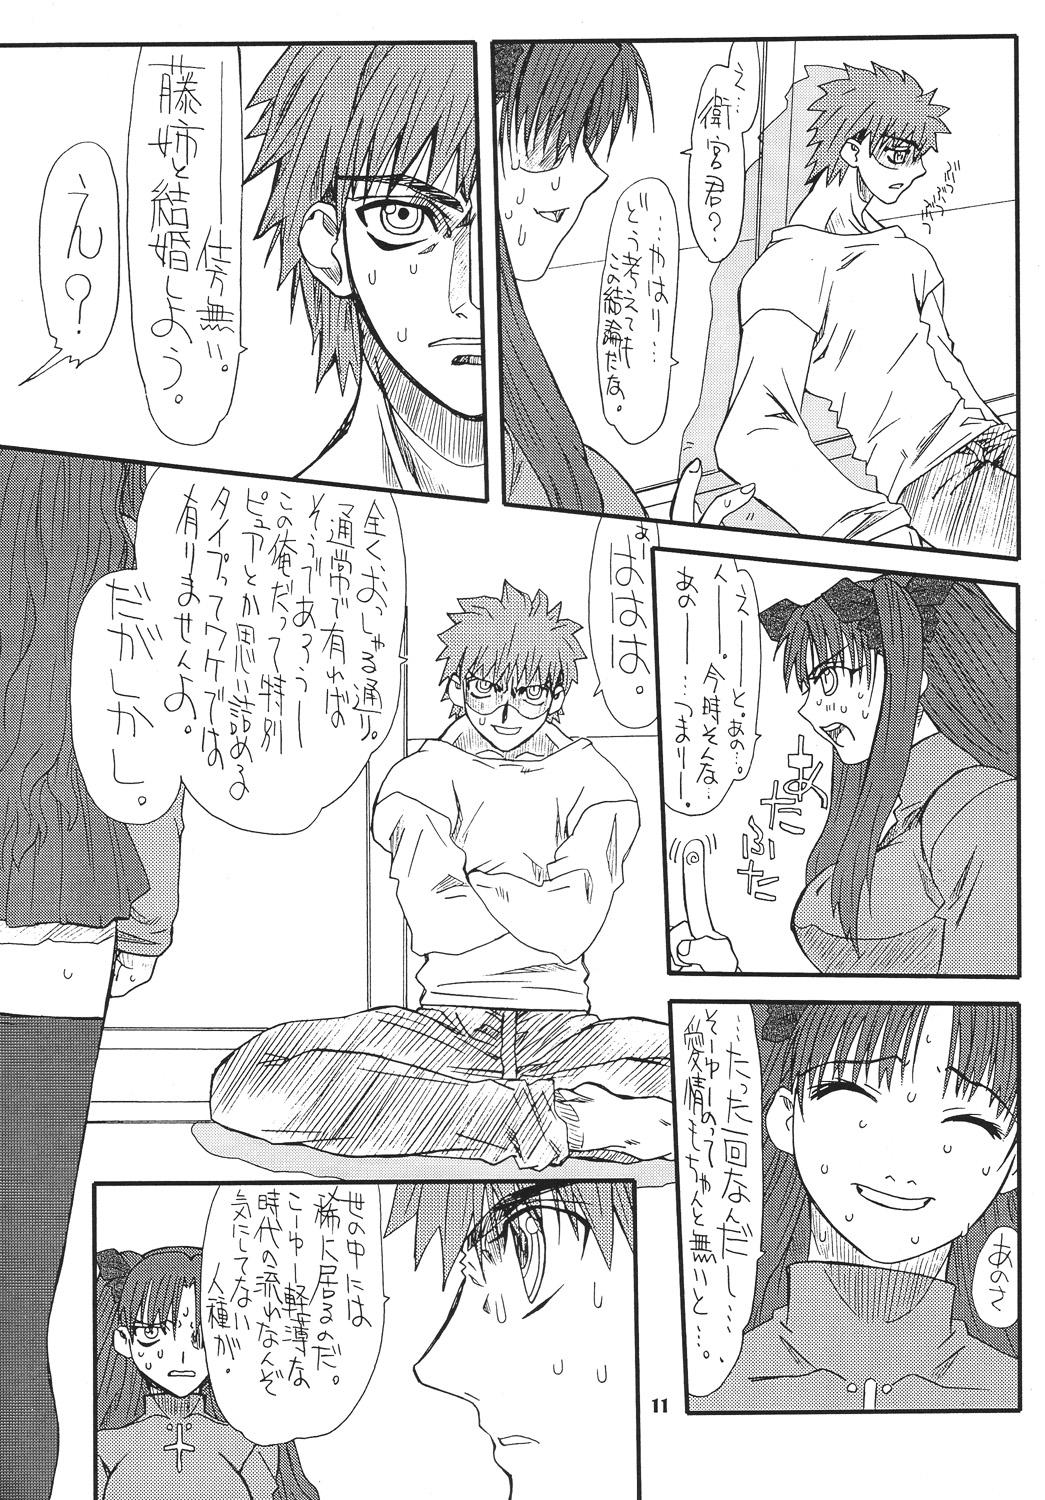 Cums Akihime San - Fate stay night Publico - Page 11